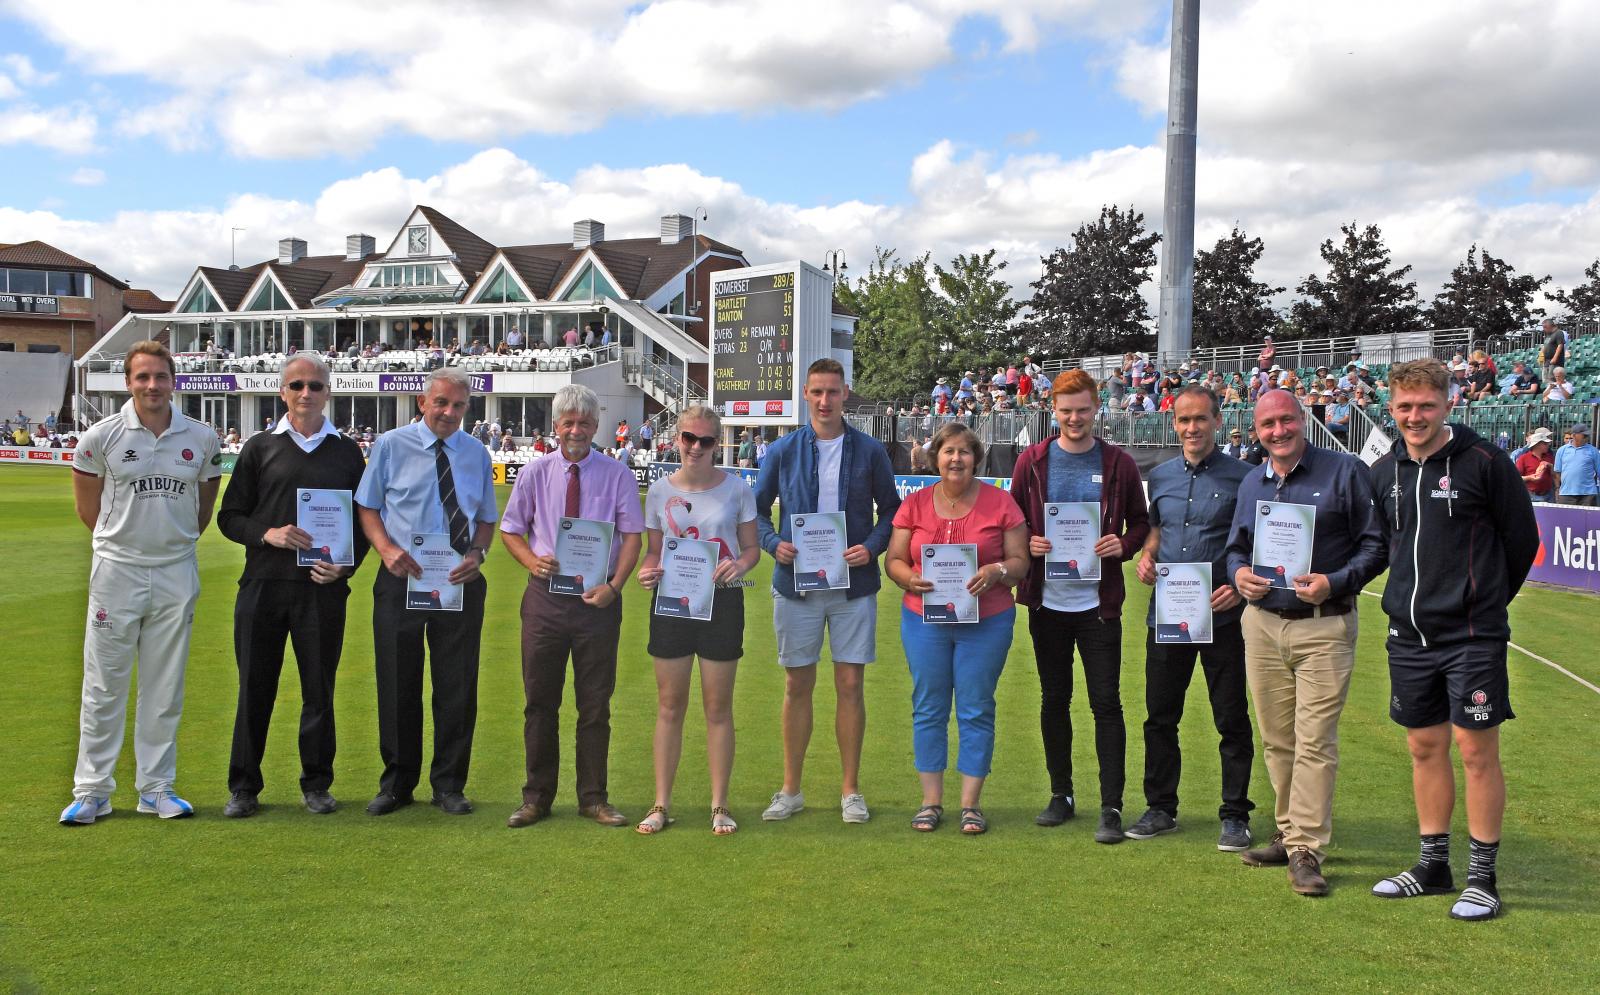 2019 County OSCA Winners at Somerset CCC